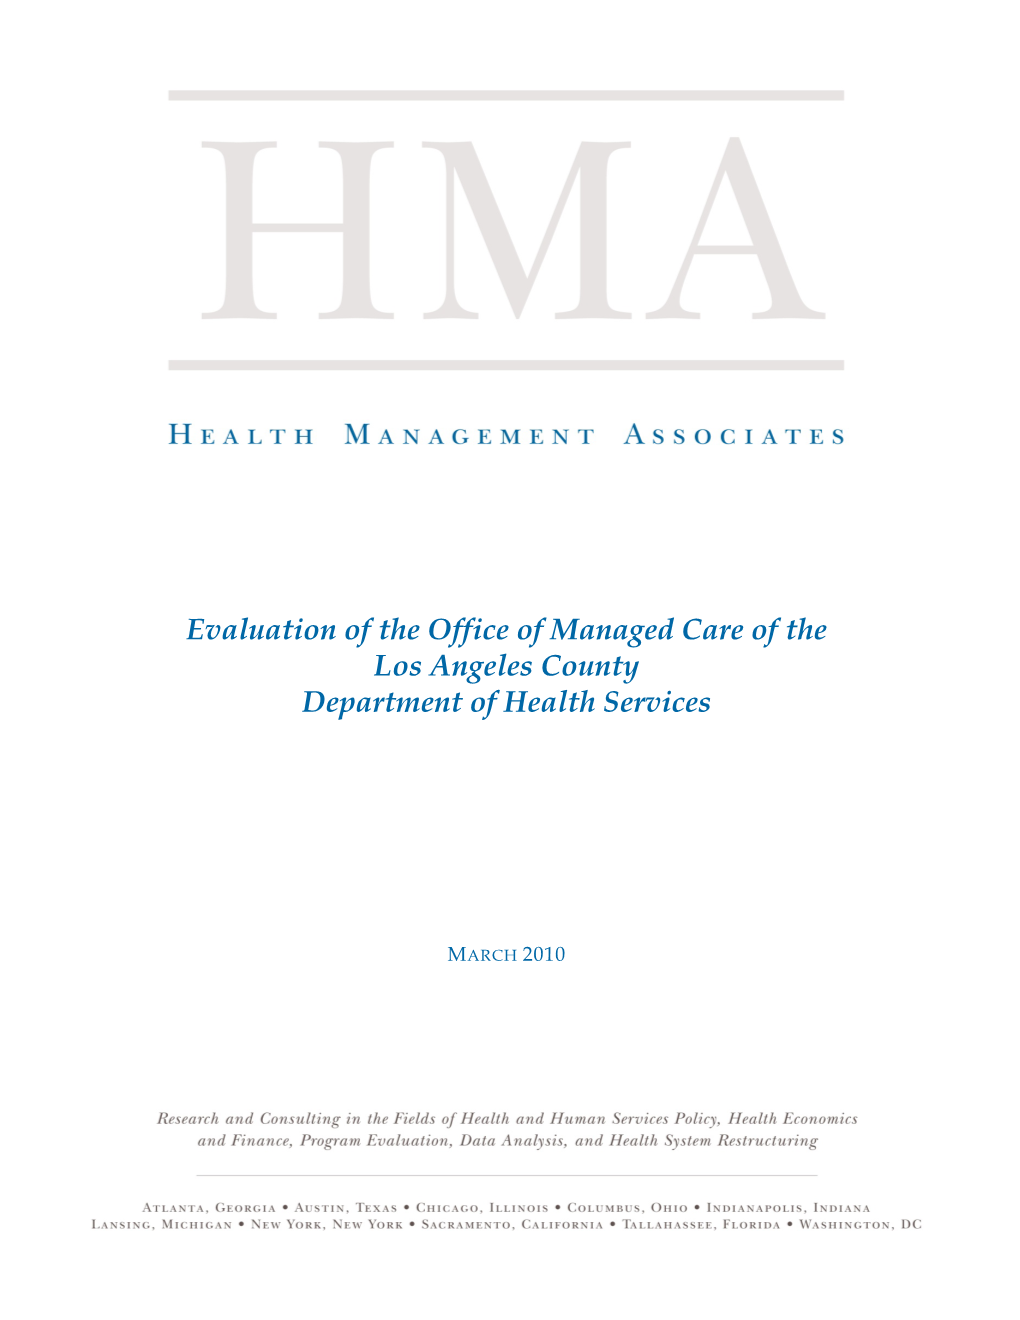 Evaluation of the Office of Managed Care of the Los Angeles County Department of Health Services